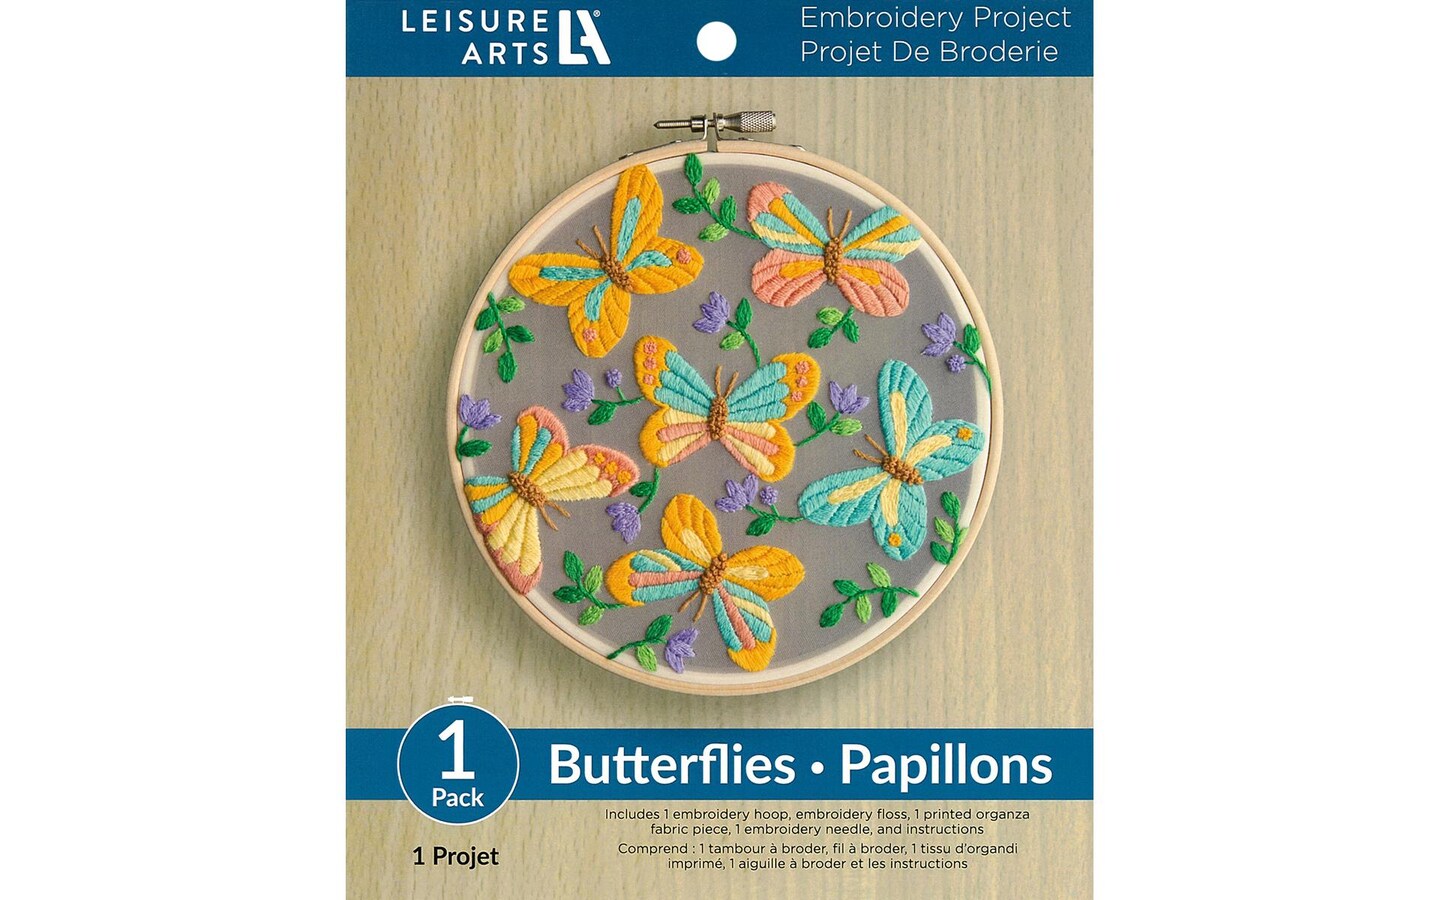 Leisure Arts Embroidery Kit 6 Butterfly - embroidery kit for